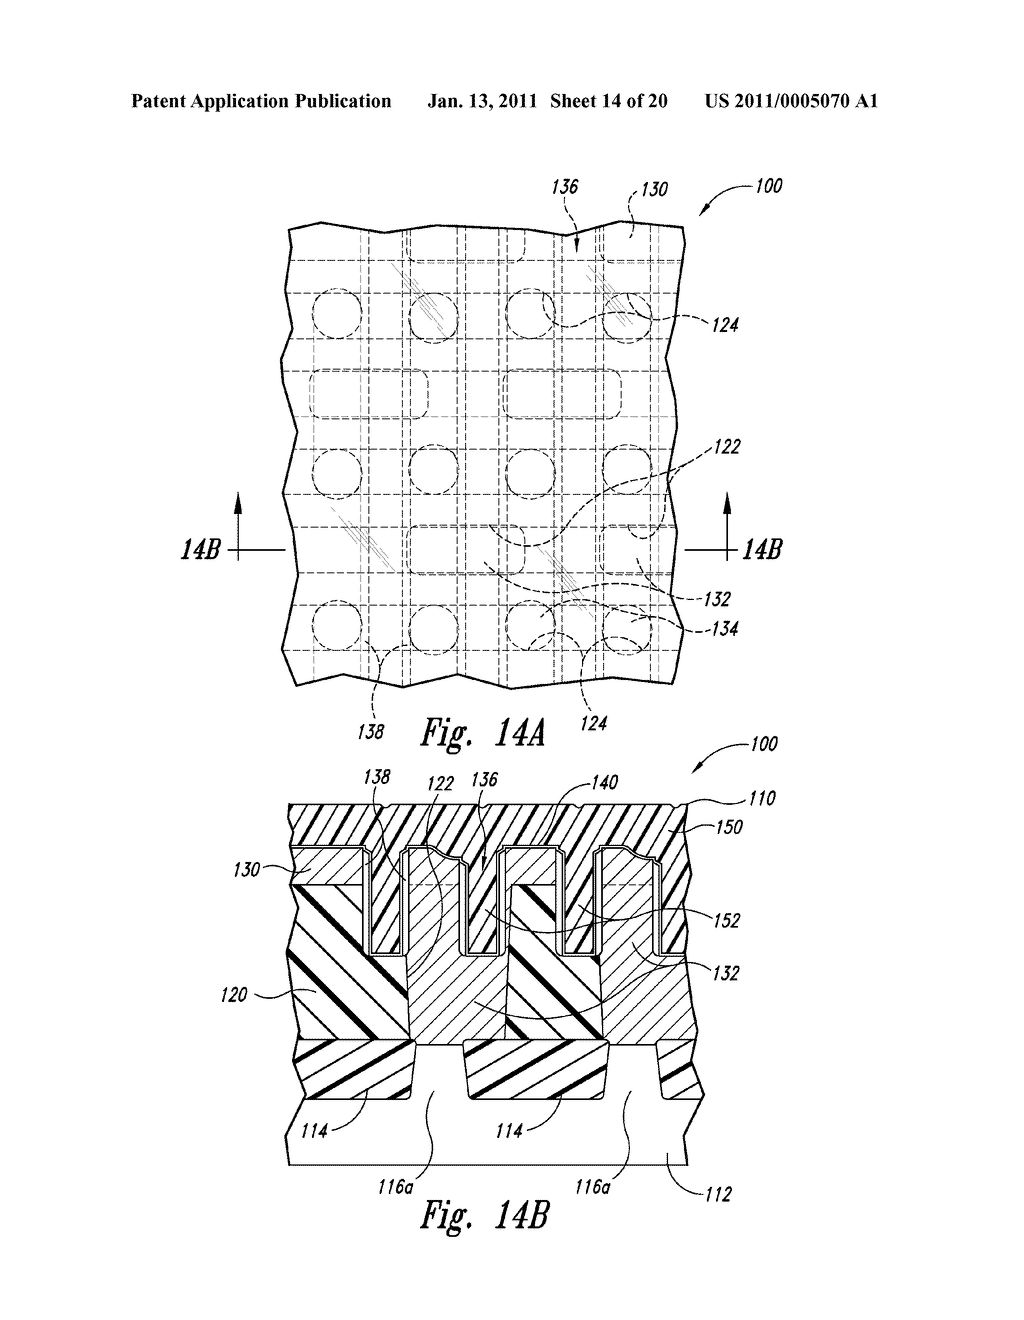 DUAL-DAMASCENE BIT LINE STRUCTURES FOR MICROELECTRONIC DEVICES AND METHODS OF FABRICATING MICROELECTRONIC DEVICES - diagram, schematic, and image 15